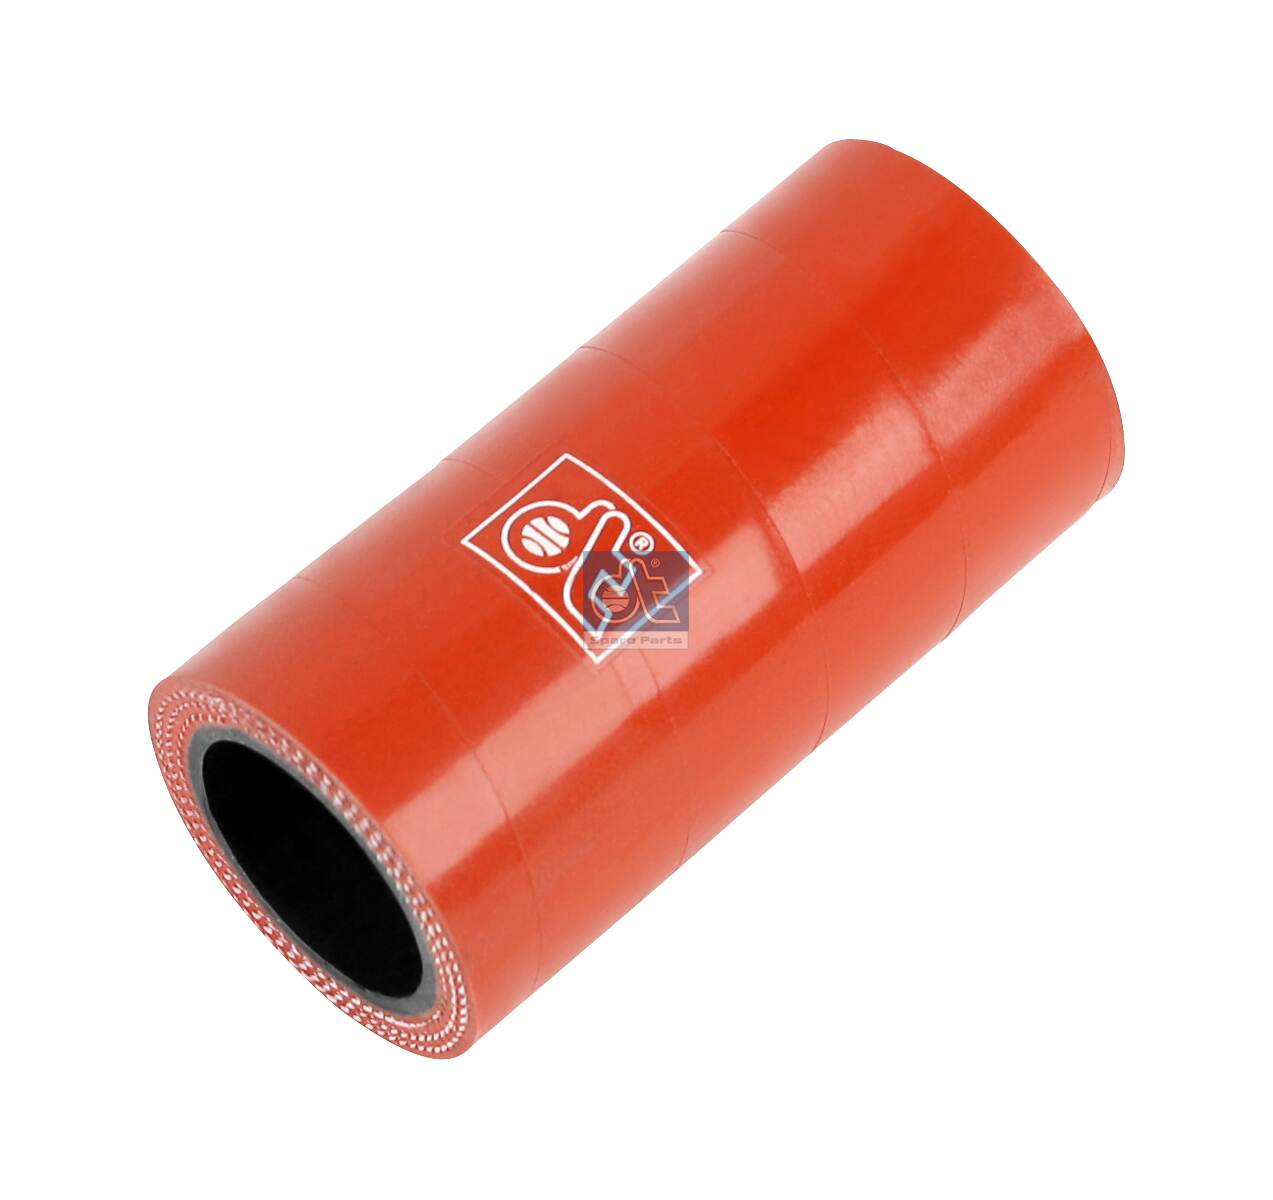 3.19051, Charge Air Hose, DT Spare Parts, 07W103683, 51.96330.0187, 51963300346, 51963300187, 51.96330.0346, 020416, 0514032, 4047755141790, 56329, 605900, 750001, 020.416, 05.14.032, 4047755989569, 6059.00, 6059